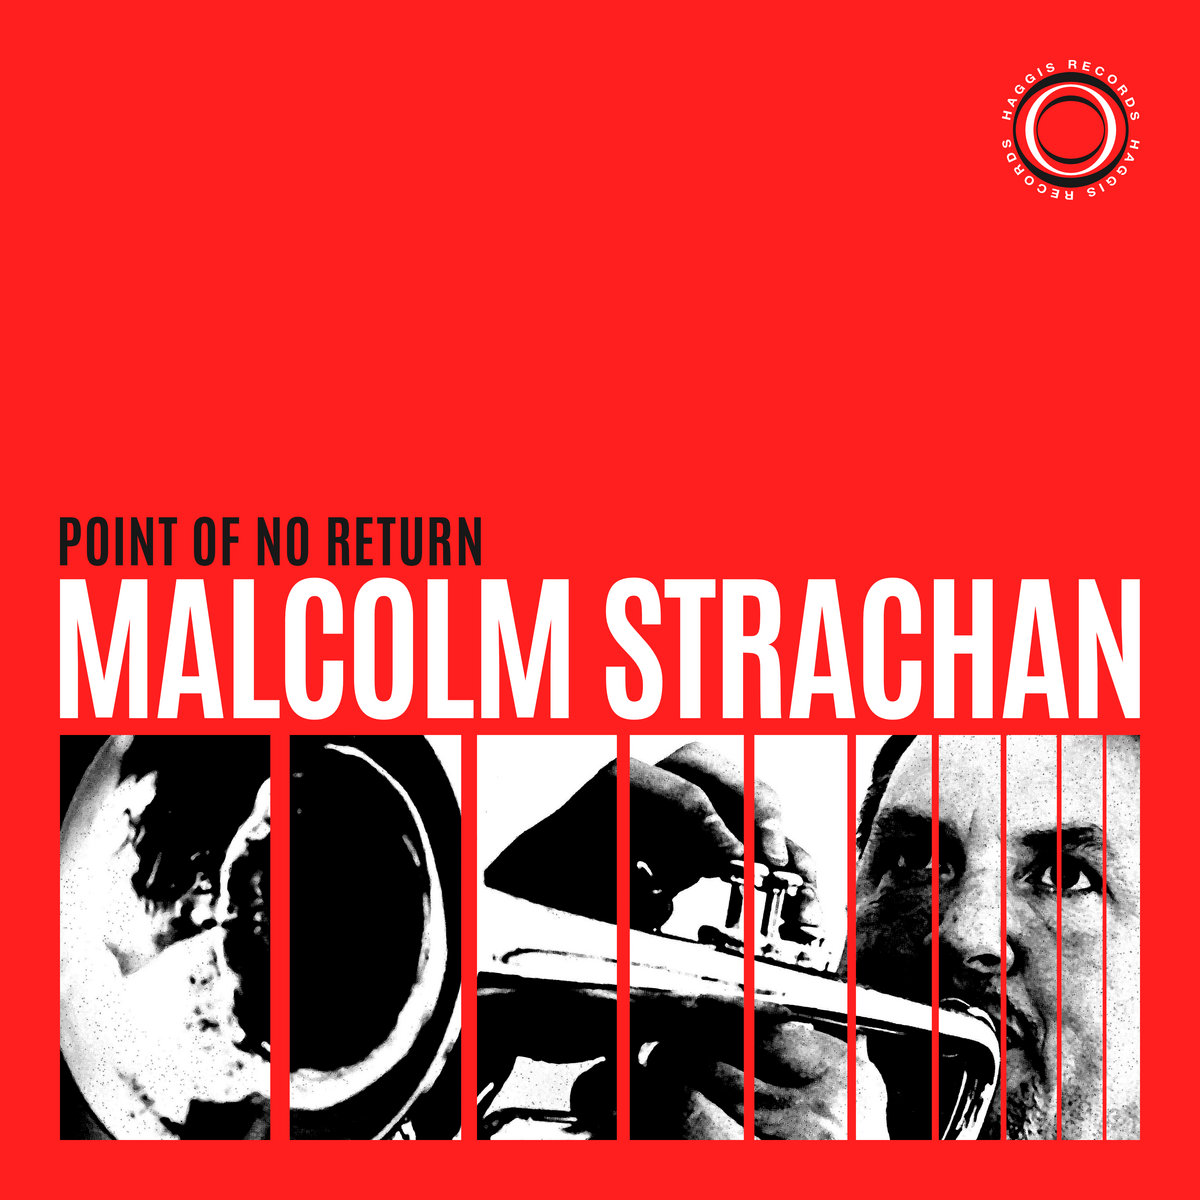 MALCOLM STRACHAN – POINT OF NO RETURN